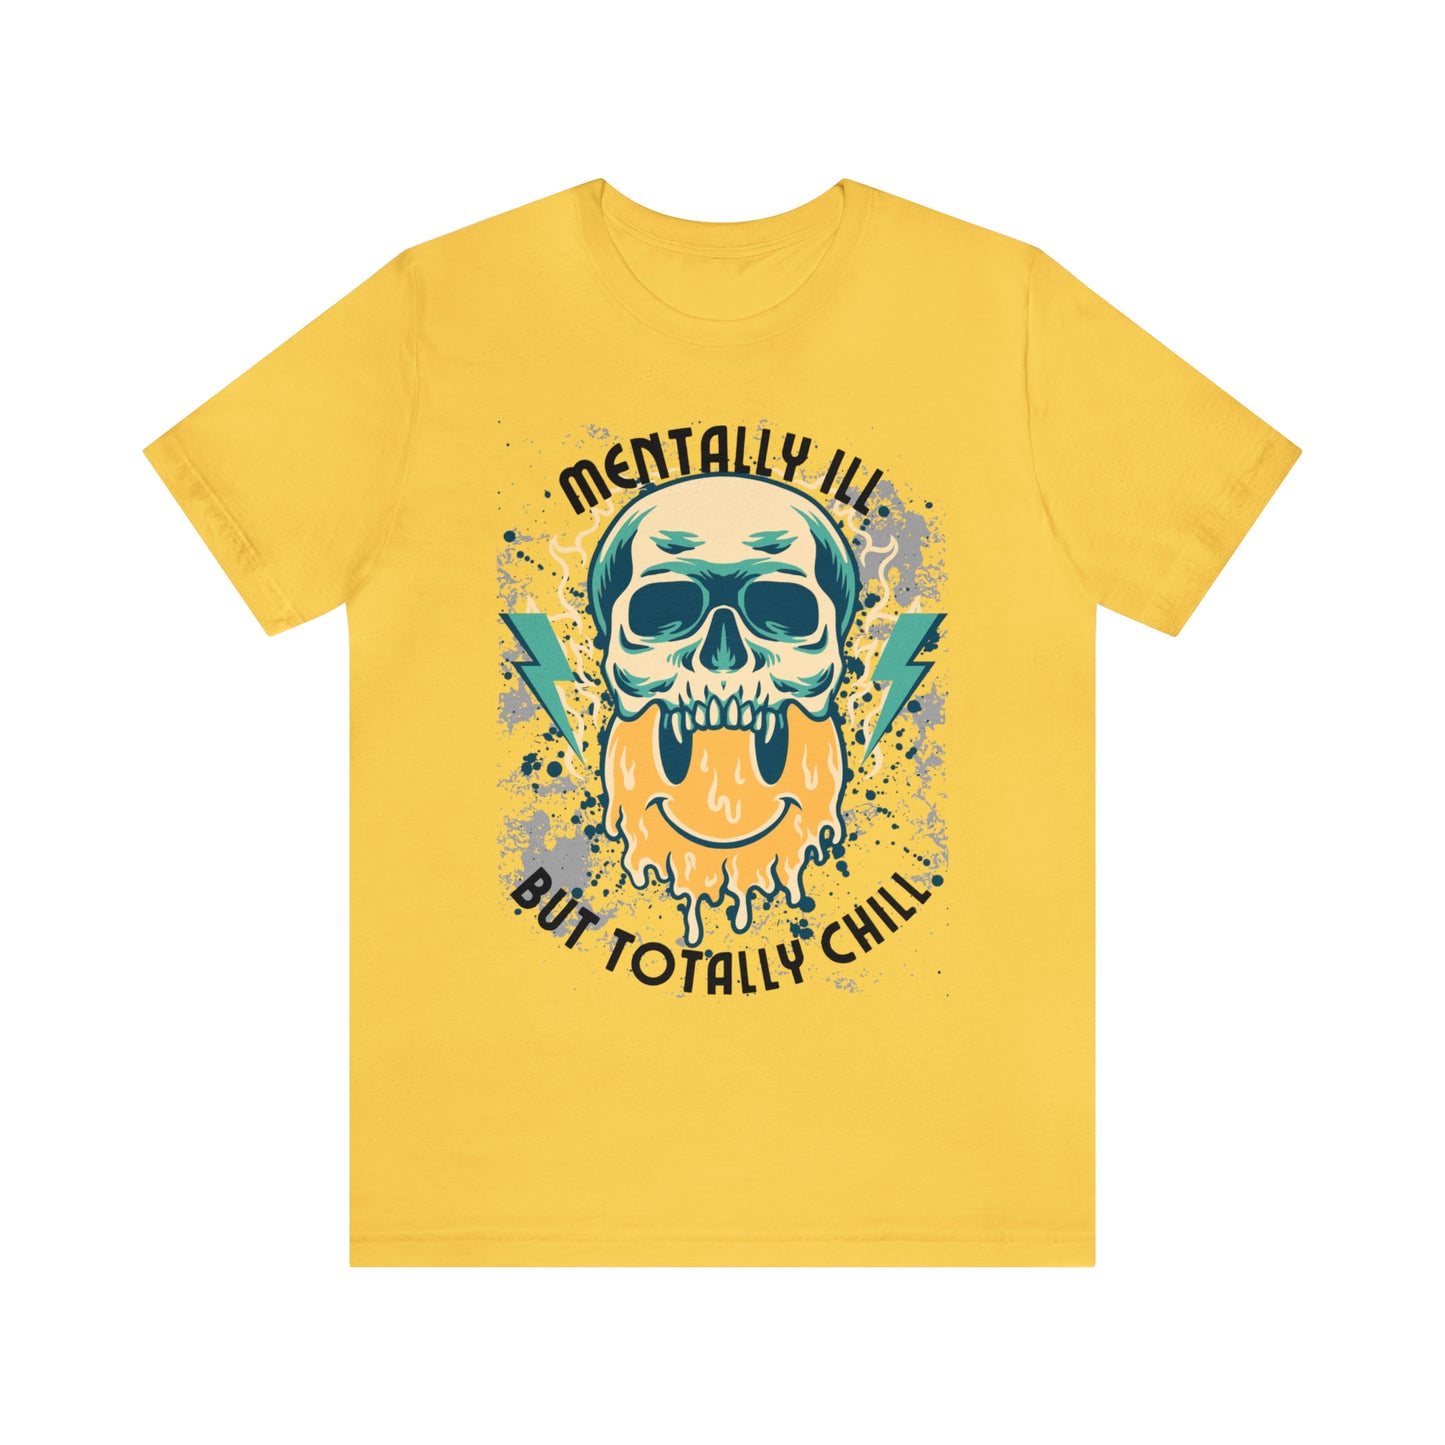 "Mentally Ill, But Totally Chill" Bella Canvas Short Sleeve Tee